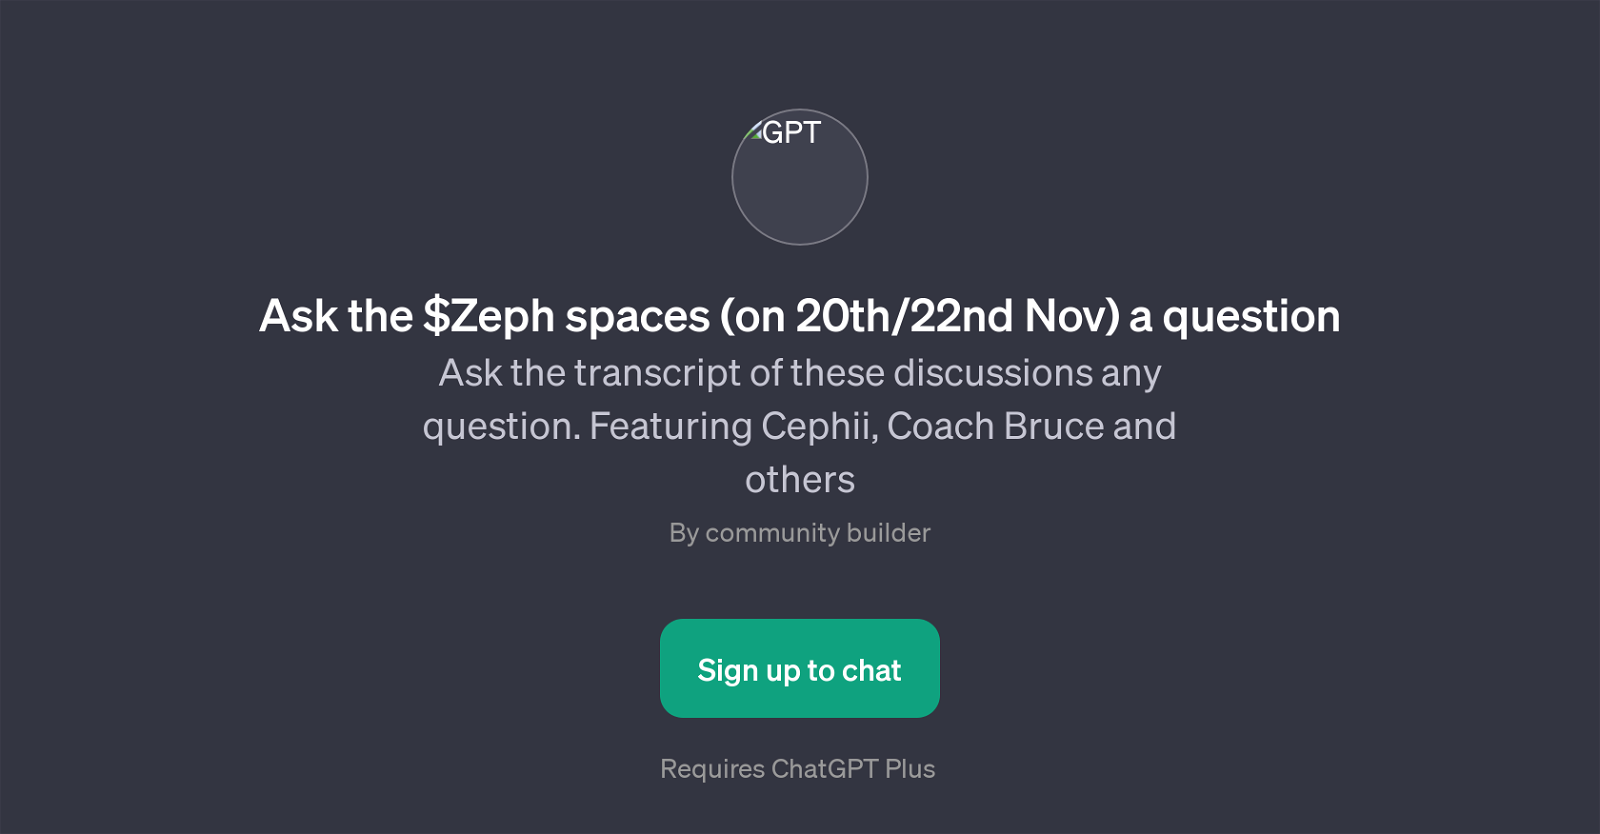 Ask the $Zeph spaces (on 20th/22nd Nov) a question website